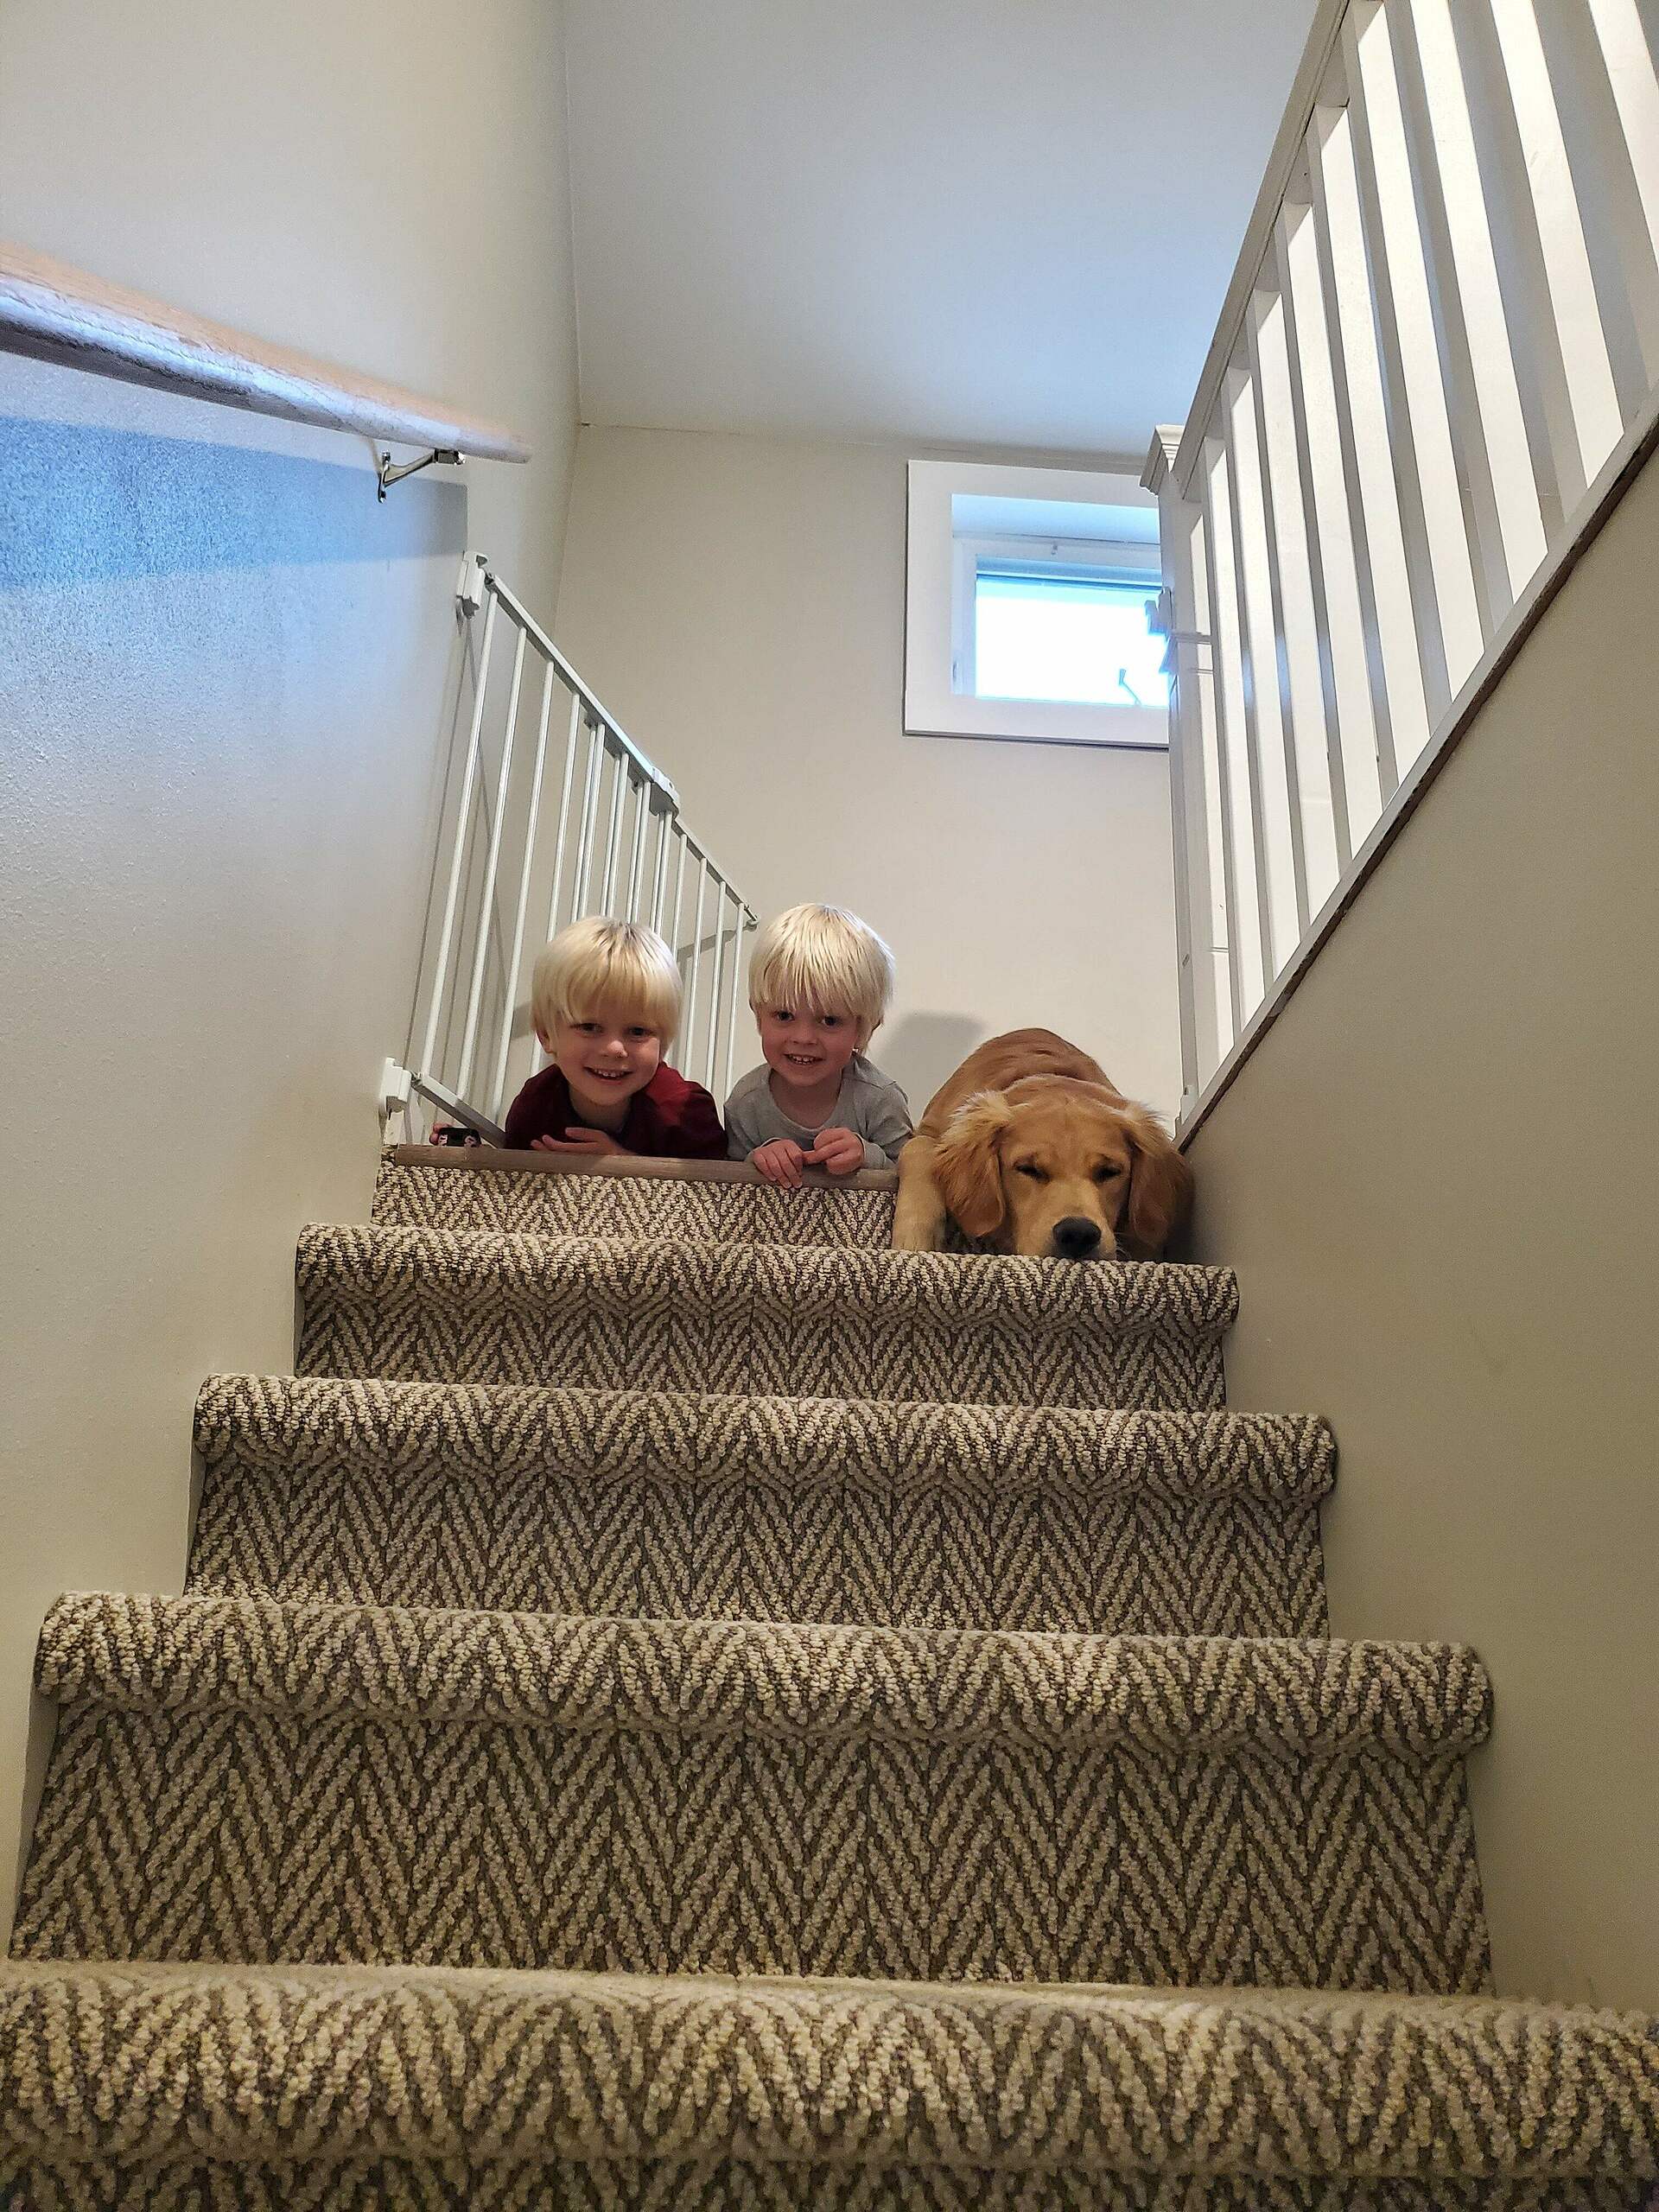 Two cheerful children and their loyal golden retriever companion pause for a cute moment on the pet-friendly floors of the stairway.